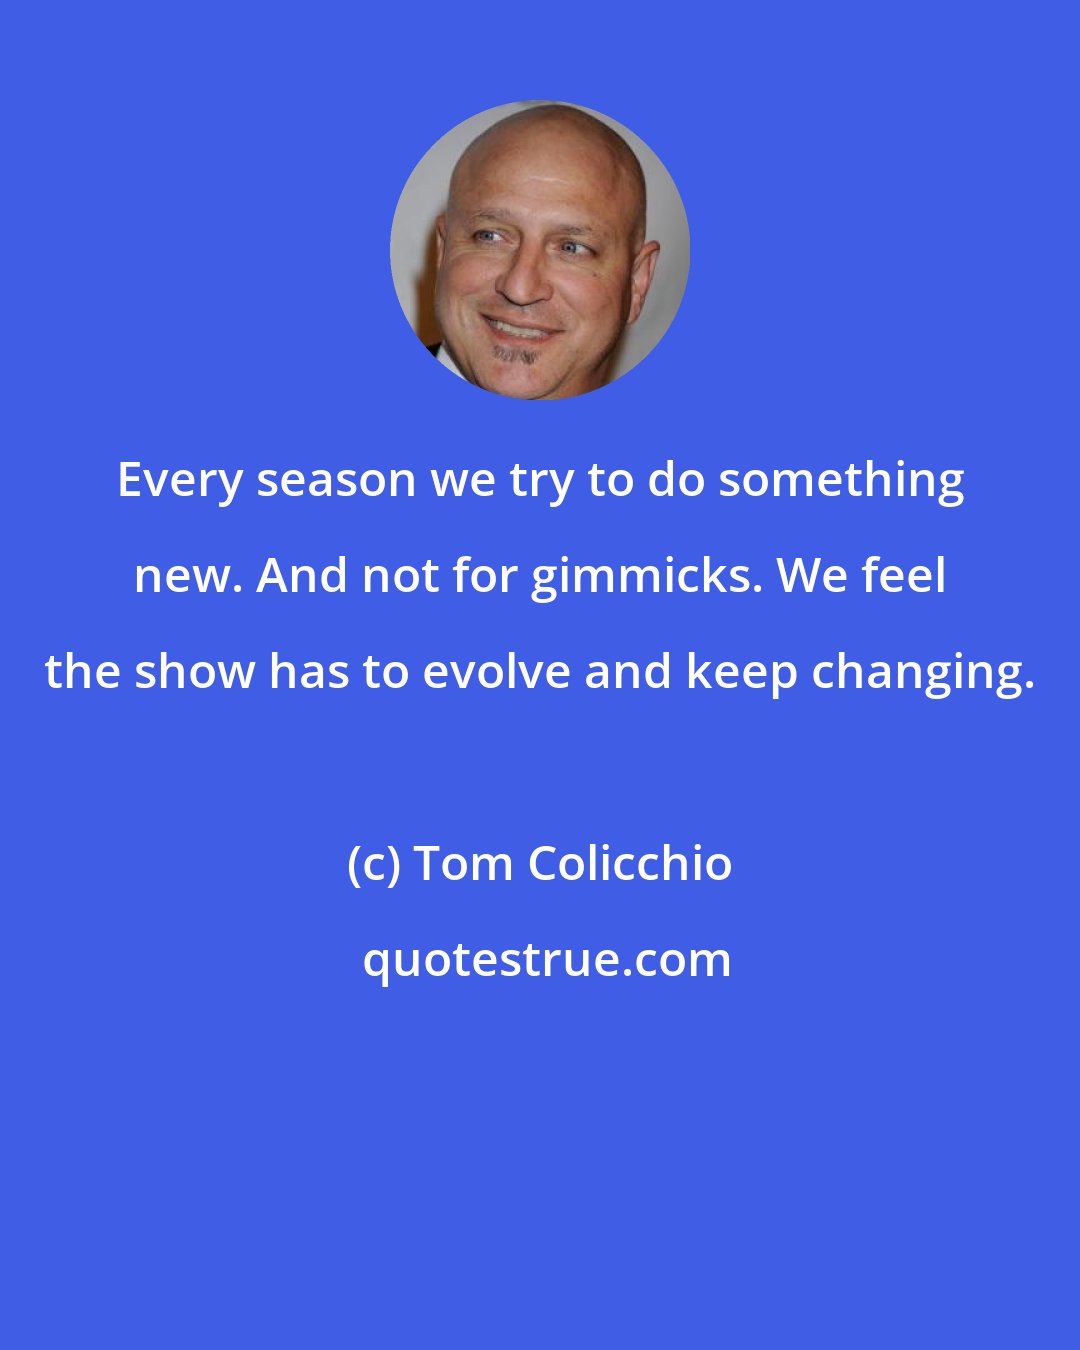 Tom Colicchio: Every season we try to do something new. And not for gimmicks. We feel the show has to evolve and keep changing.